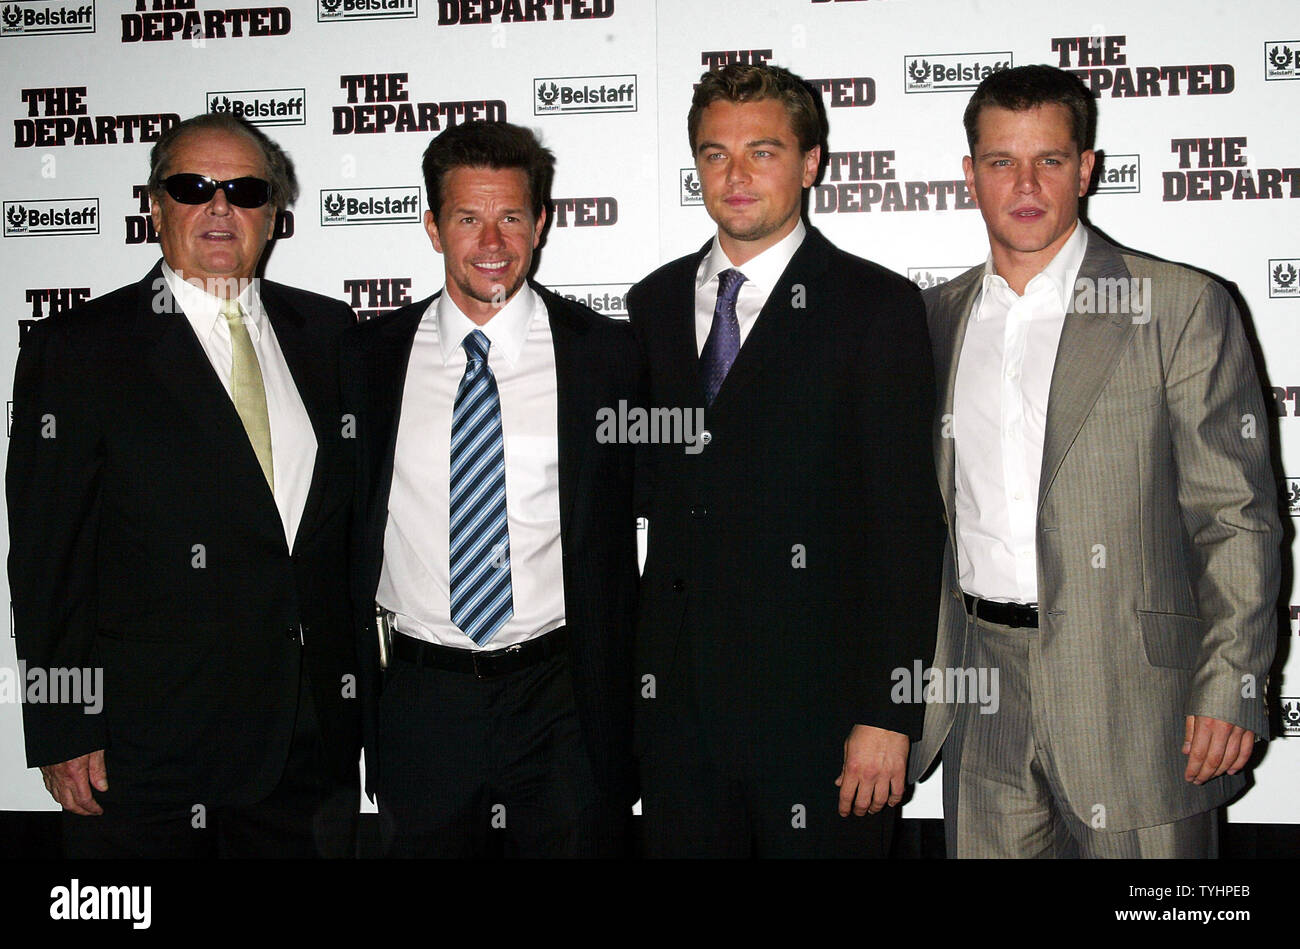 Left to right): Jack Nicholson, Mark Wahlberg, Leonardo DiCaprio and Matt  Damon arrive for the premiere of their new movie "The Departed" at the  Ziegfeld Theater in New York on September 26,